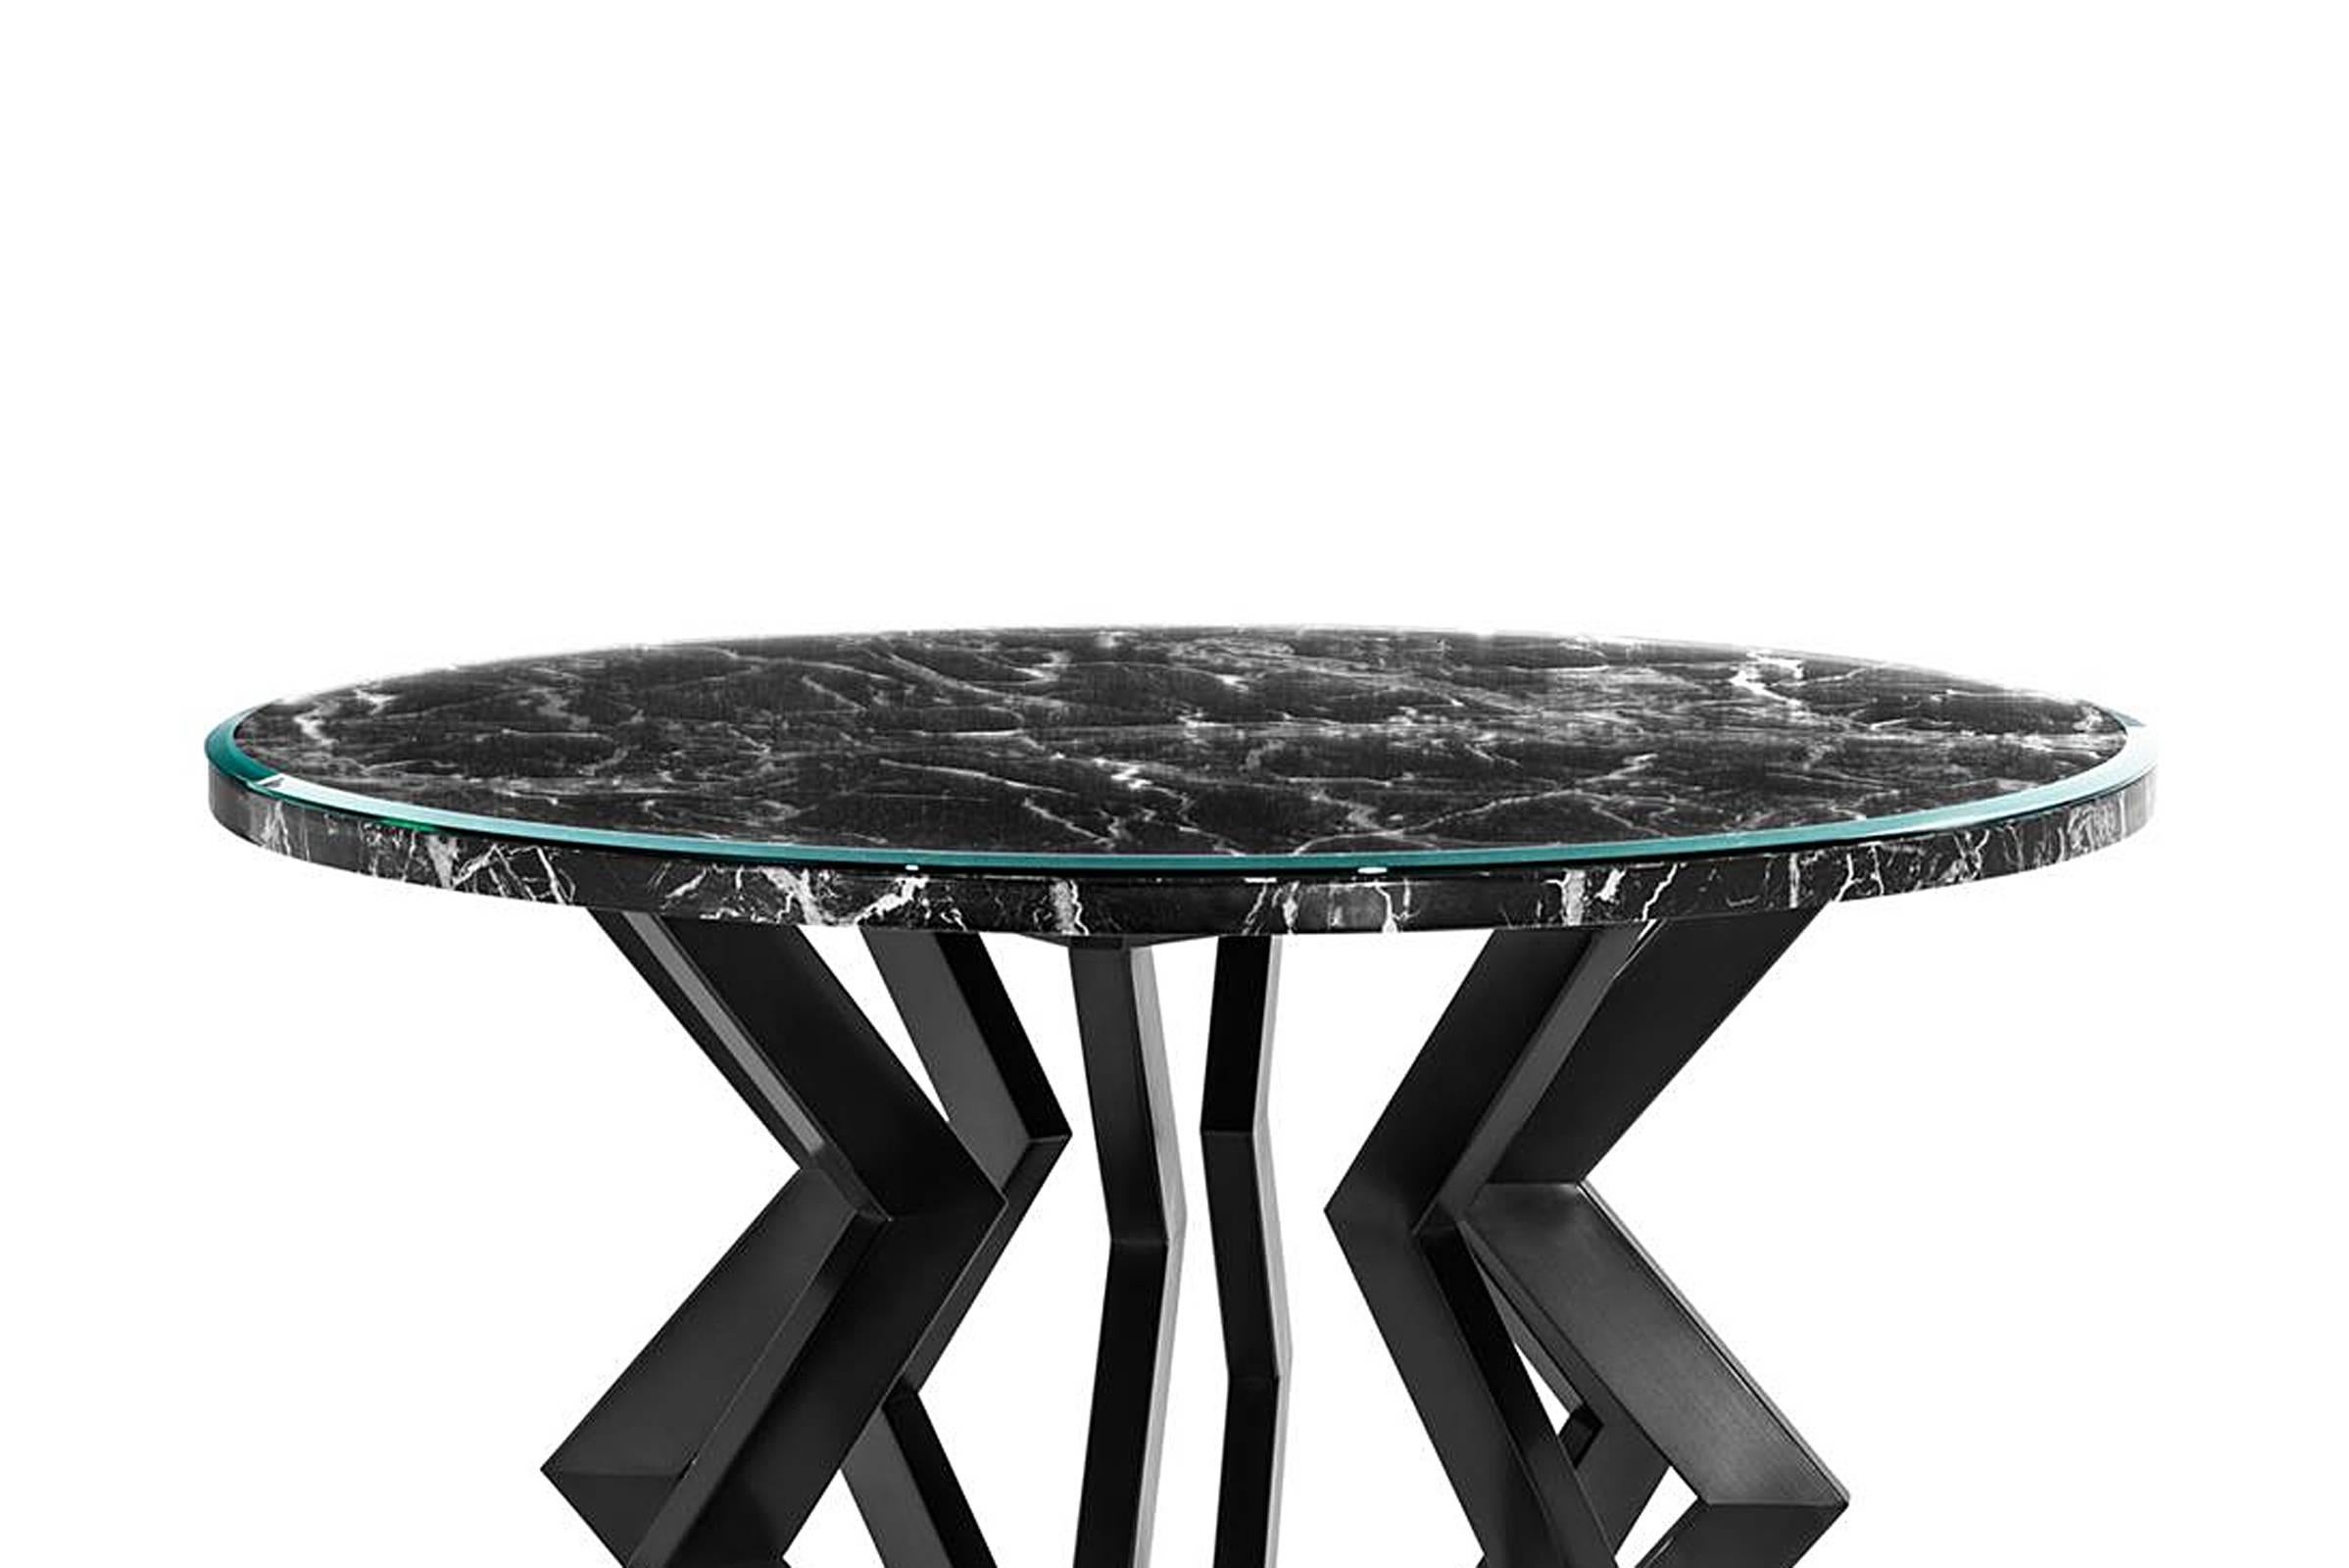 Round table lightning with resin marble top on
structure in solid bronze finish. Beveled clear 
glass on the top.
